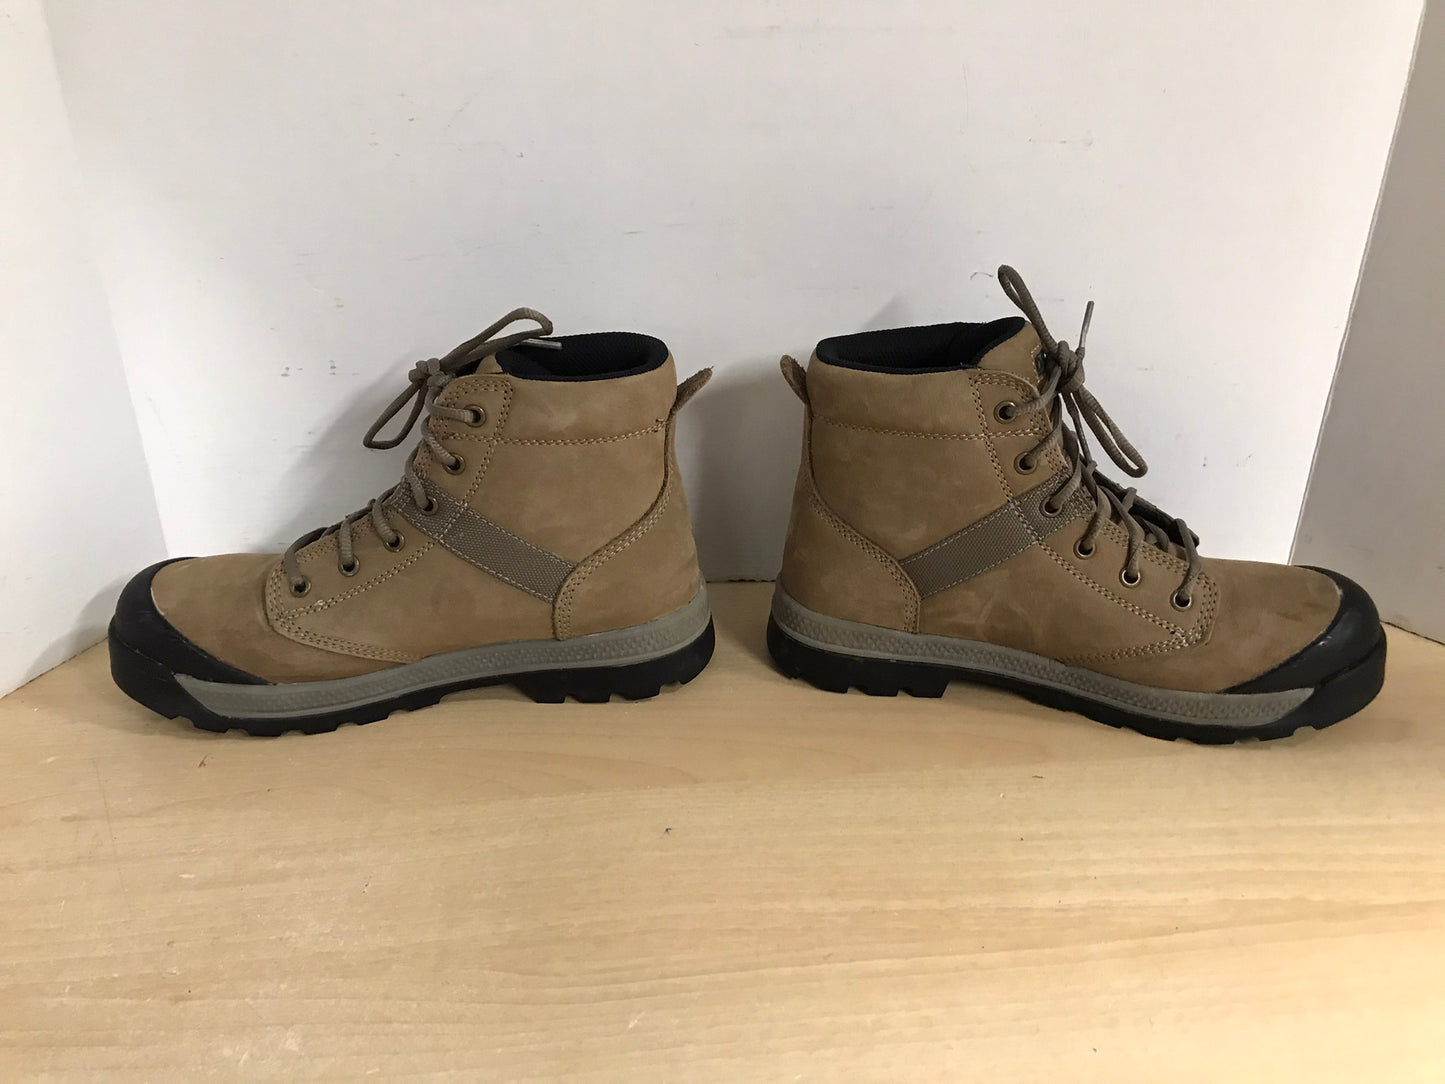 Work Boots Men's Size 8.5 Dakota SA CF With Steel Toe Leather As New